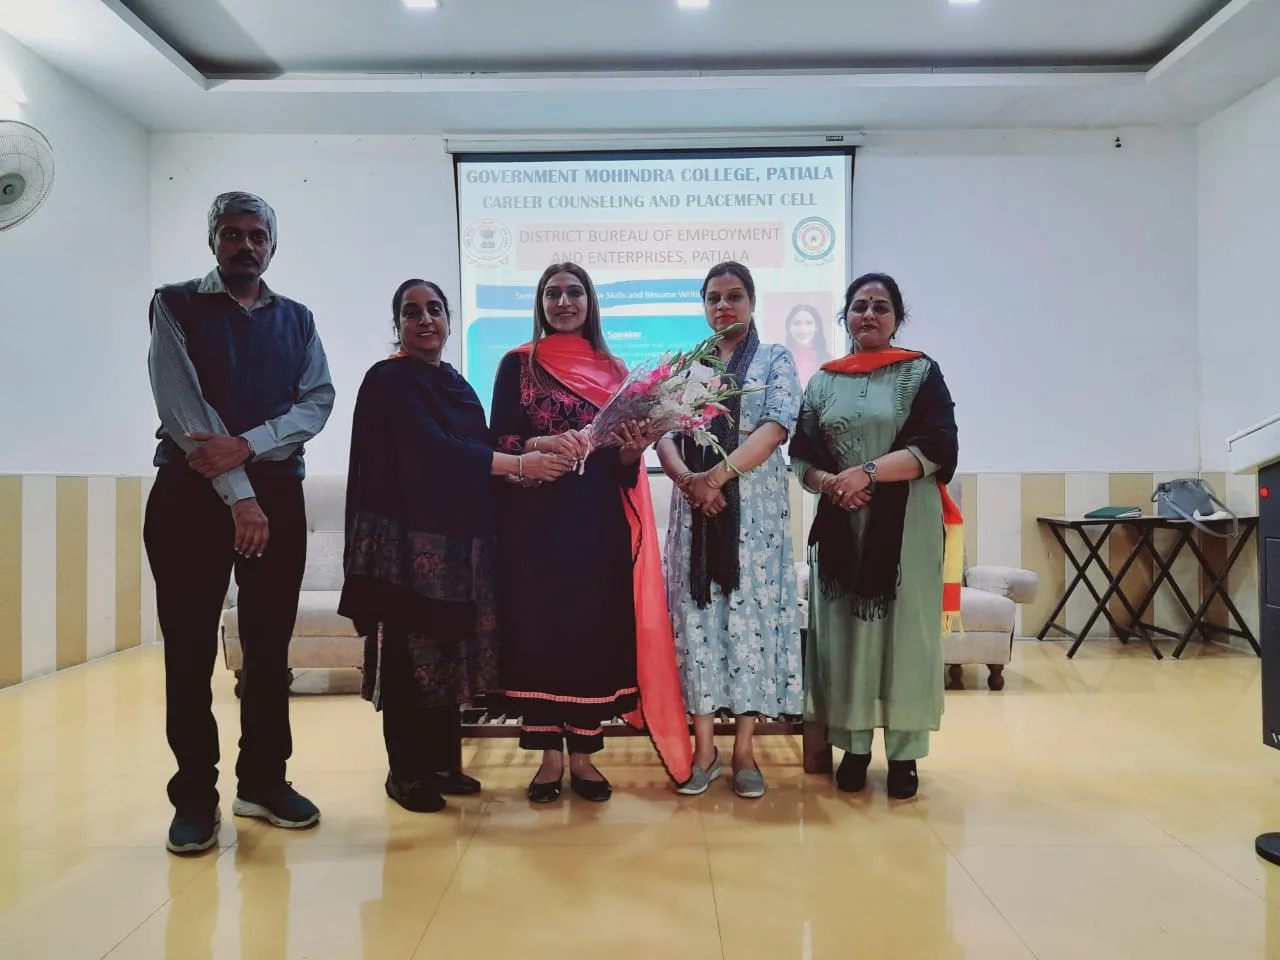 Govt Mohindra College organized workshop for students; organized special lecture on Resume writing 